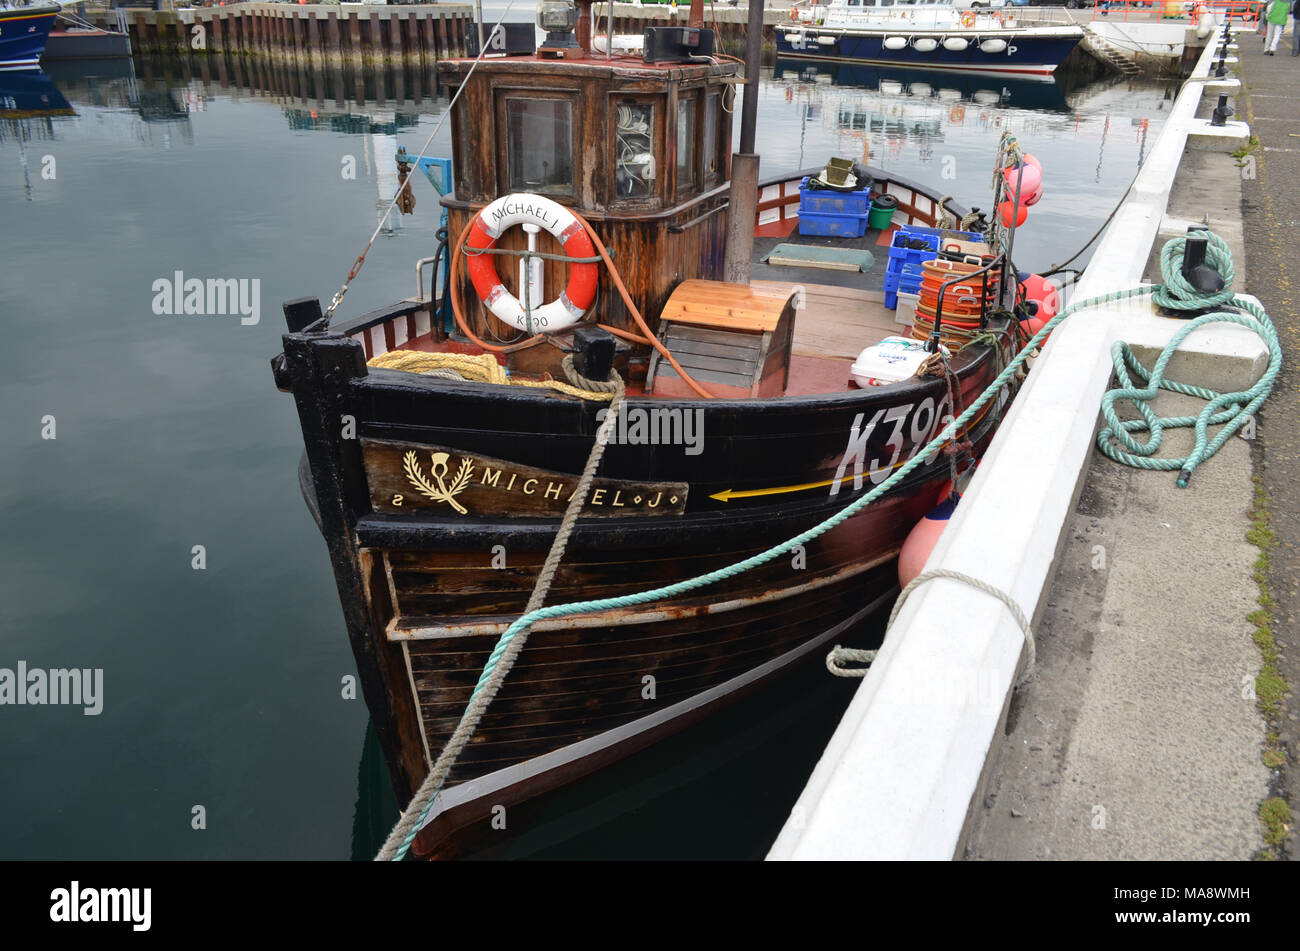 Harbour and inshore fishing fleet in Kirkwall, Mainland island, Orkney (Scotland) Stock Photo